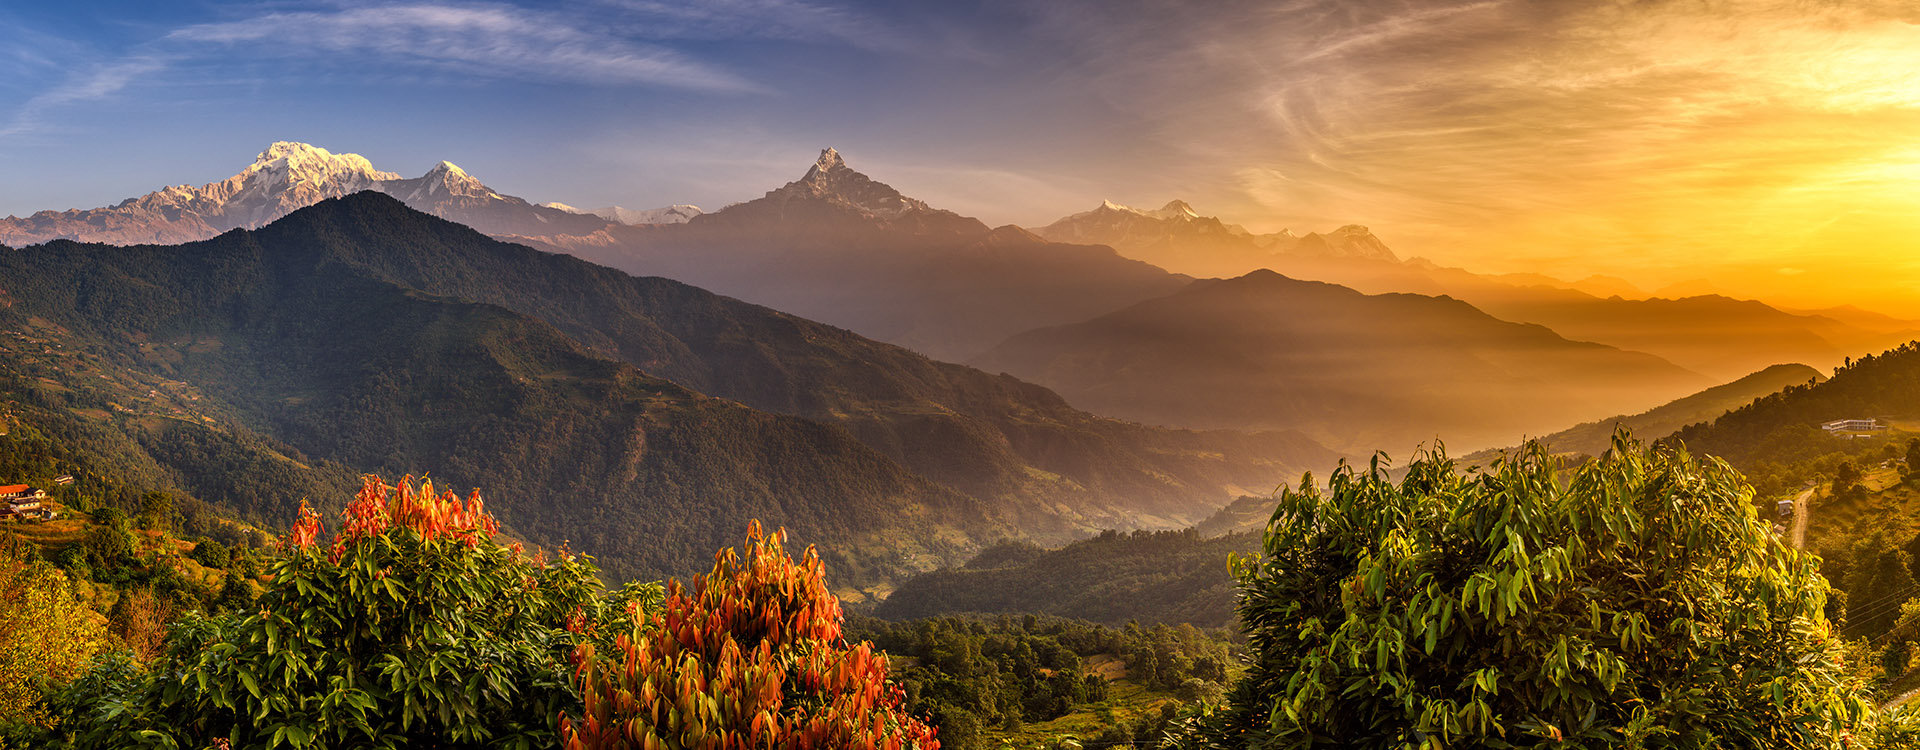 Sunrise over Annapurna. Mountains in the Himalayas near Pokhara in Nepal